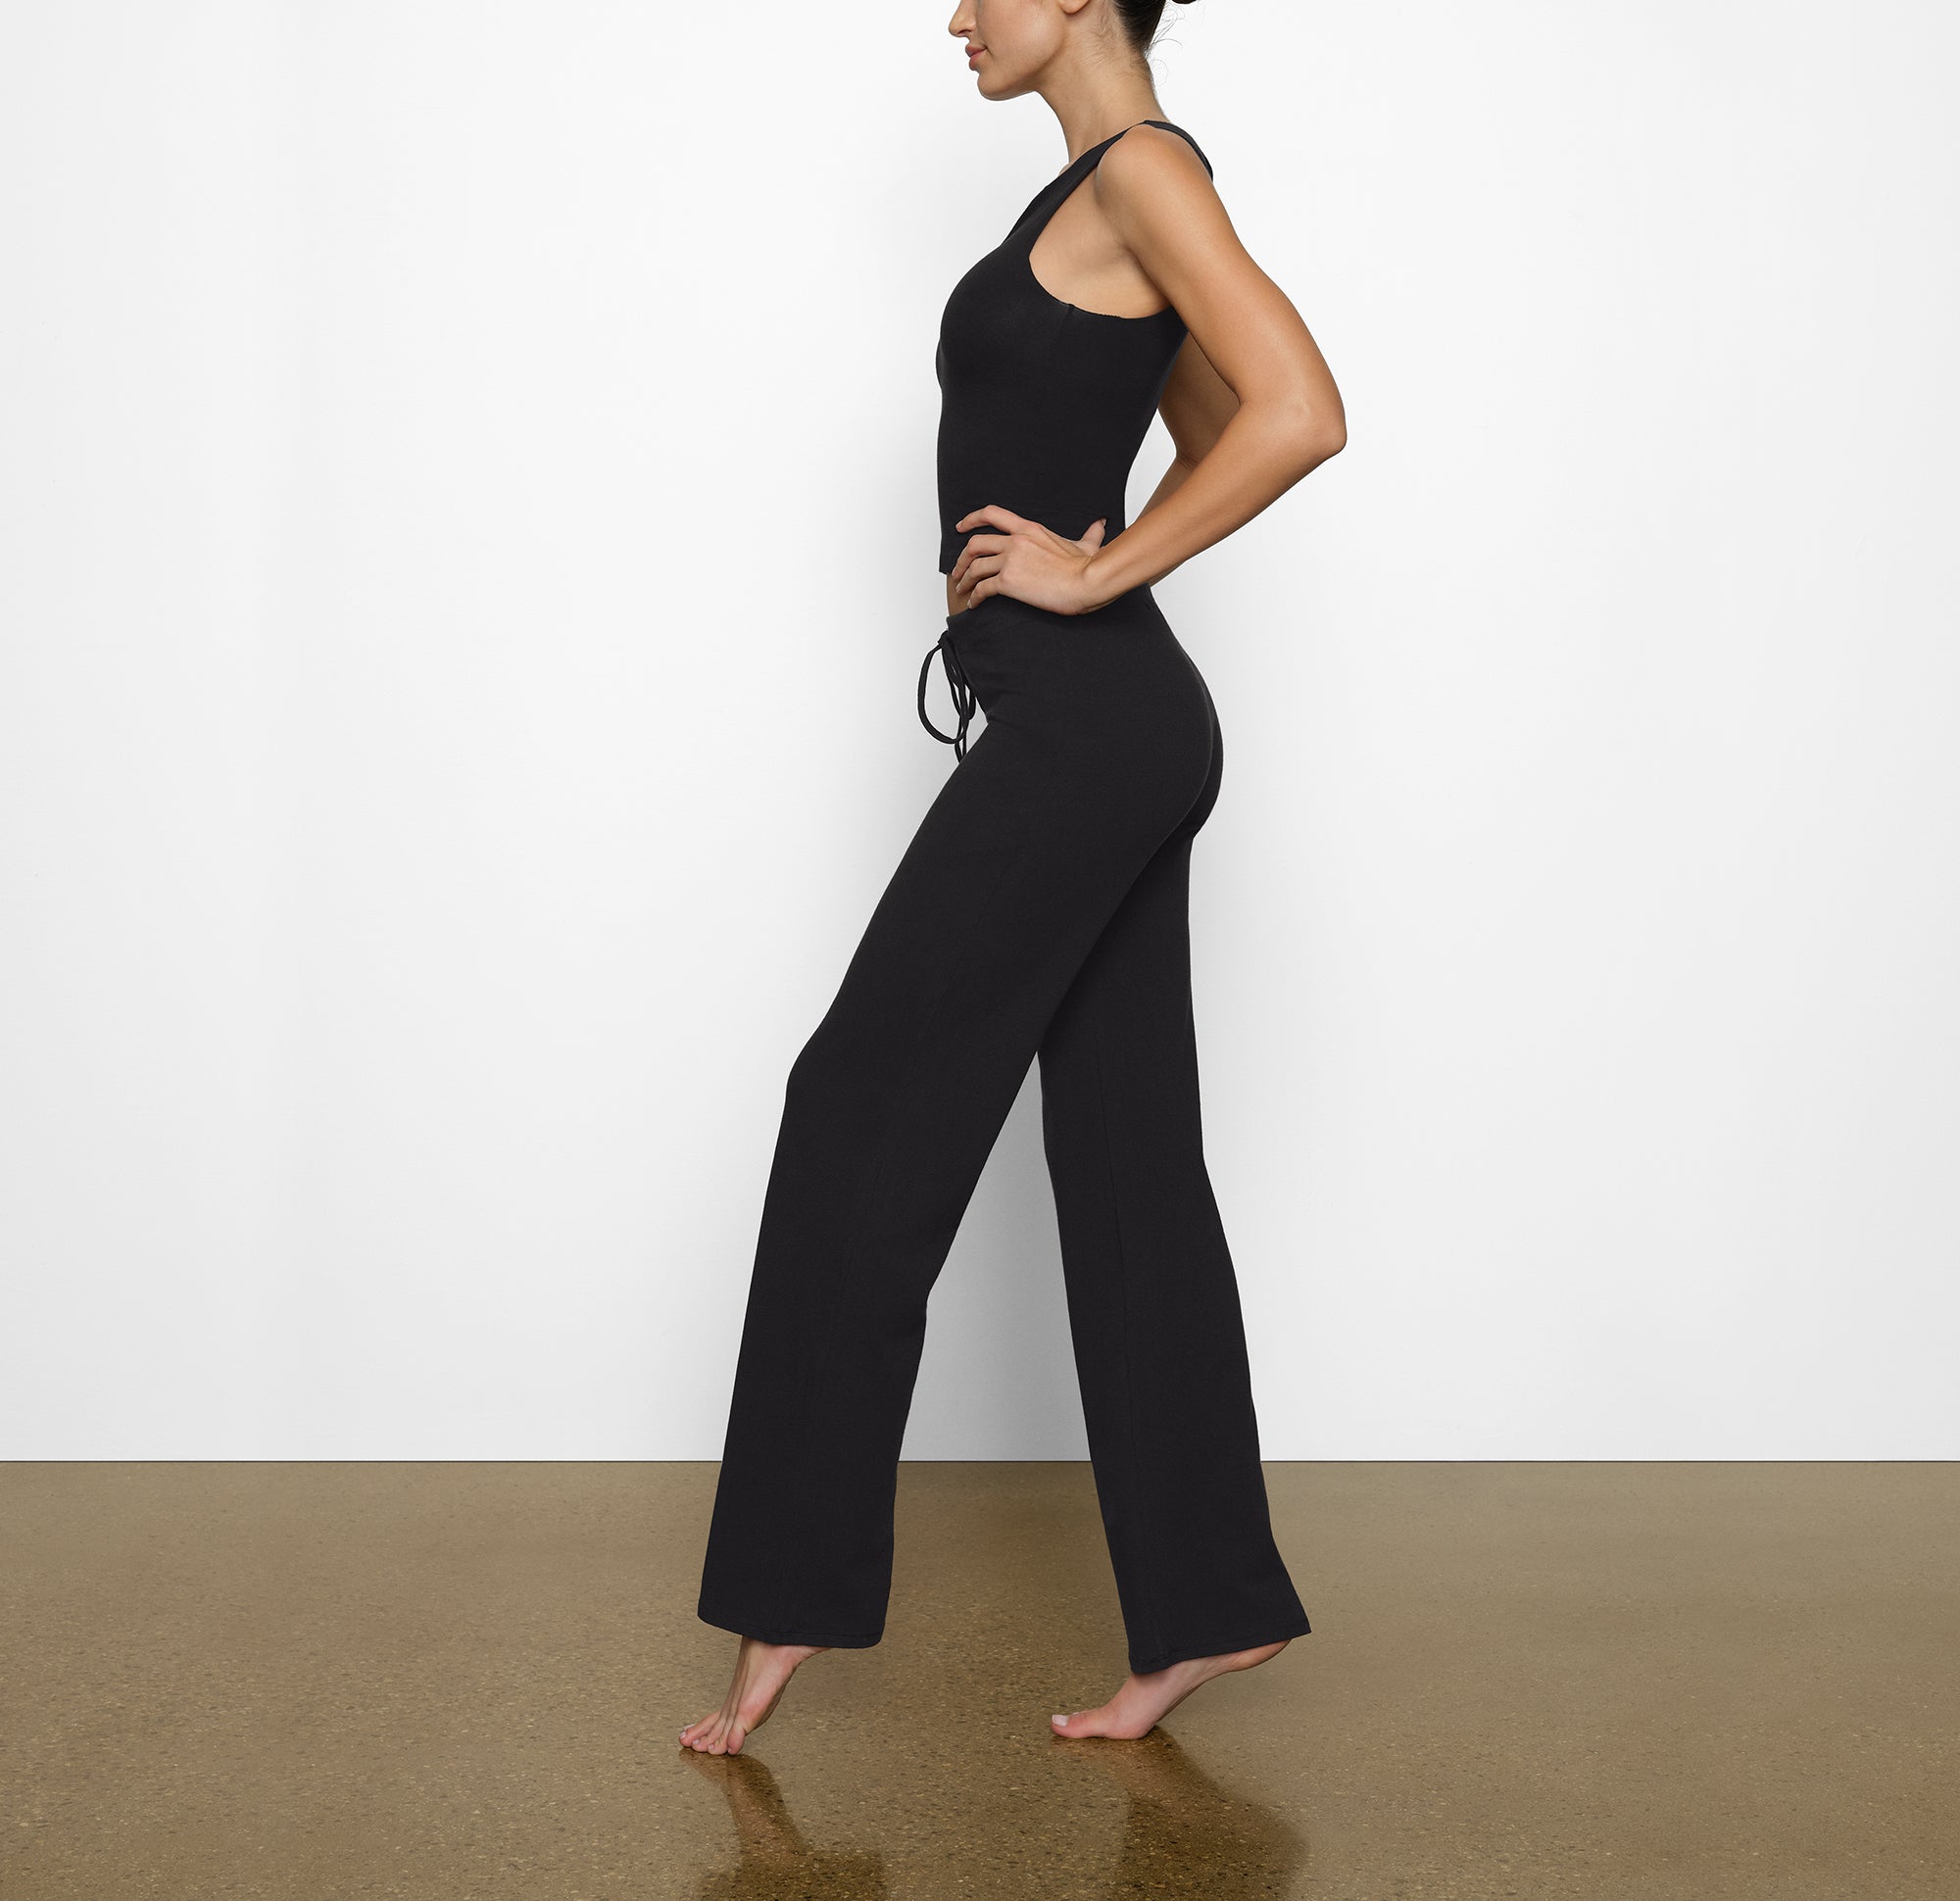 Cotton Jersey Foldover Pant - Marble - XS is in stock at Skims for $62.00 :  r/SkimsRestockAlerts